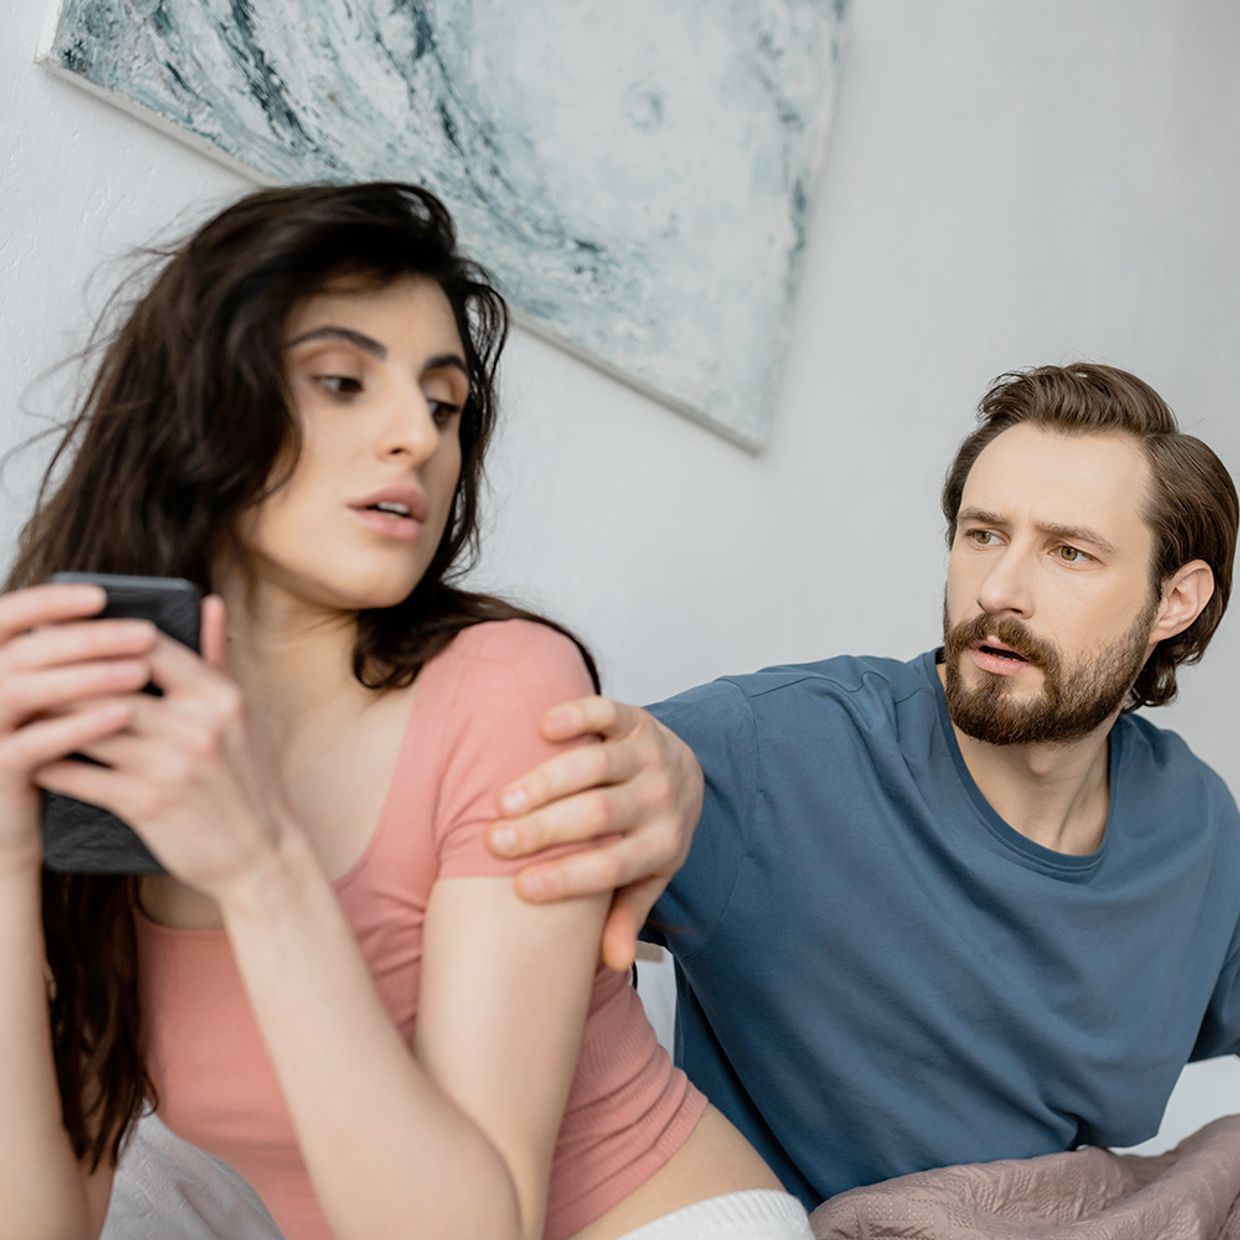 Can Relationship Work After Cheating?